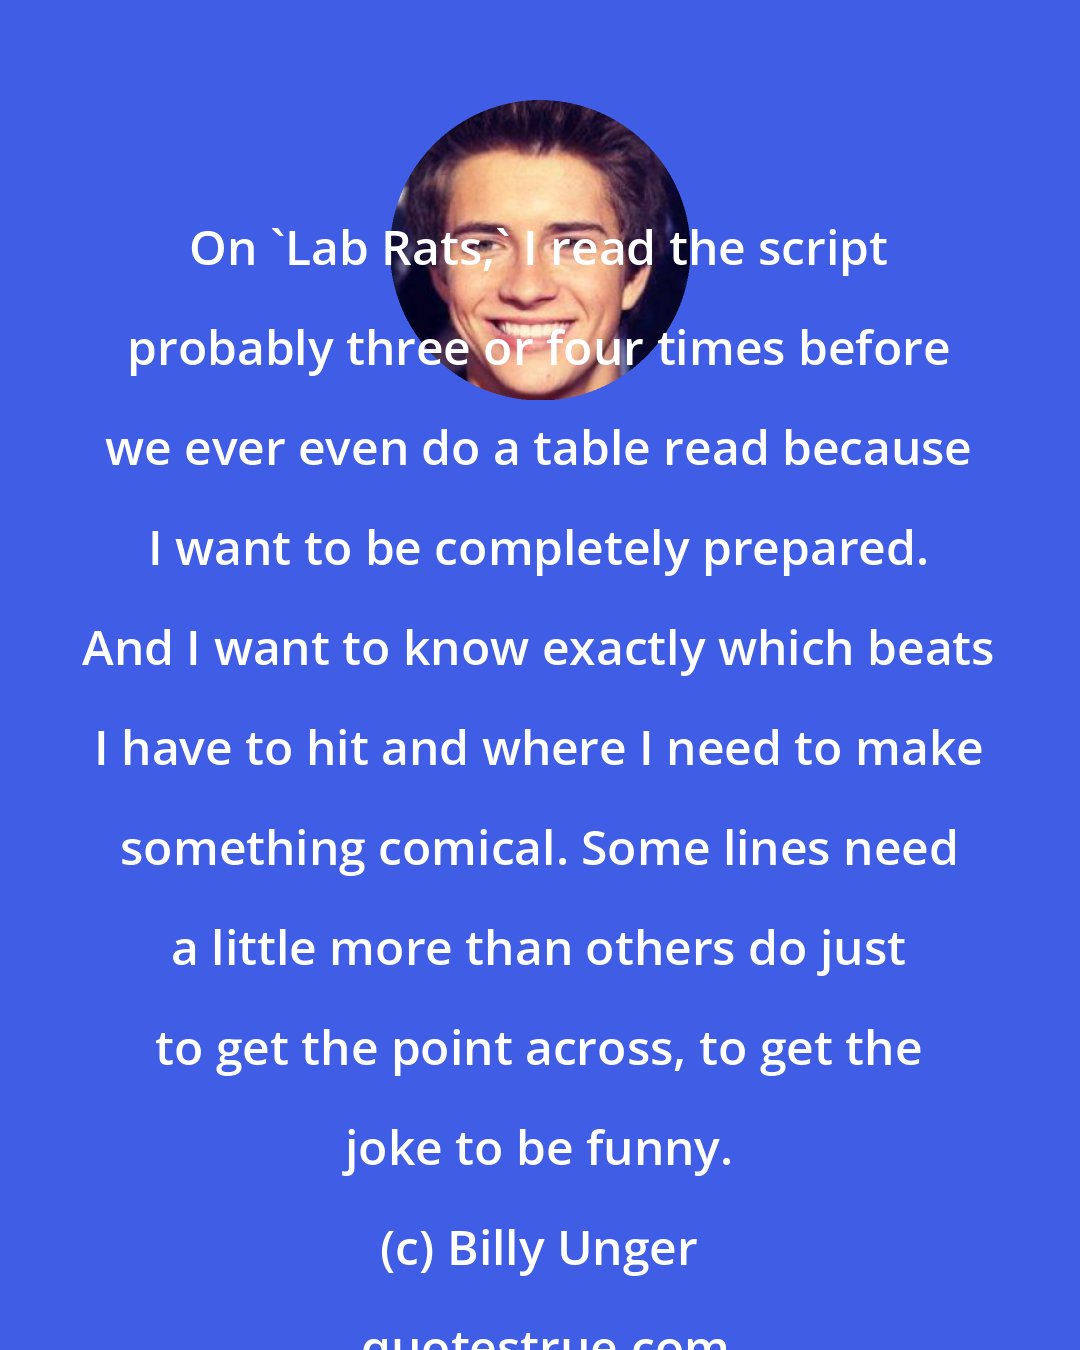 Billy Unger: On 'Lab Rats,' I read the script probably three or four times before we ever even do a table read because I want to be completely prepared. And I want to know exactly which beats I have to hit and where I need to make something comical. Some lines need a little more than others do just to get the point across, to get the joke to be funny.